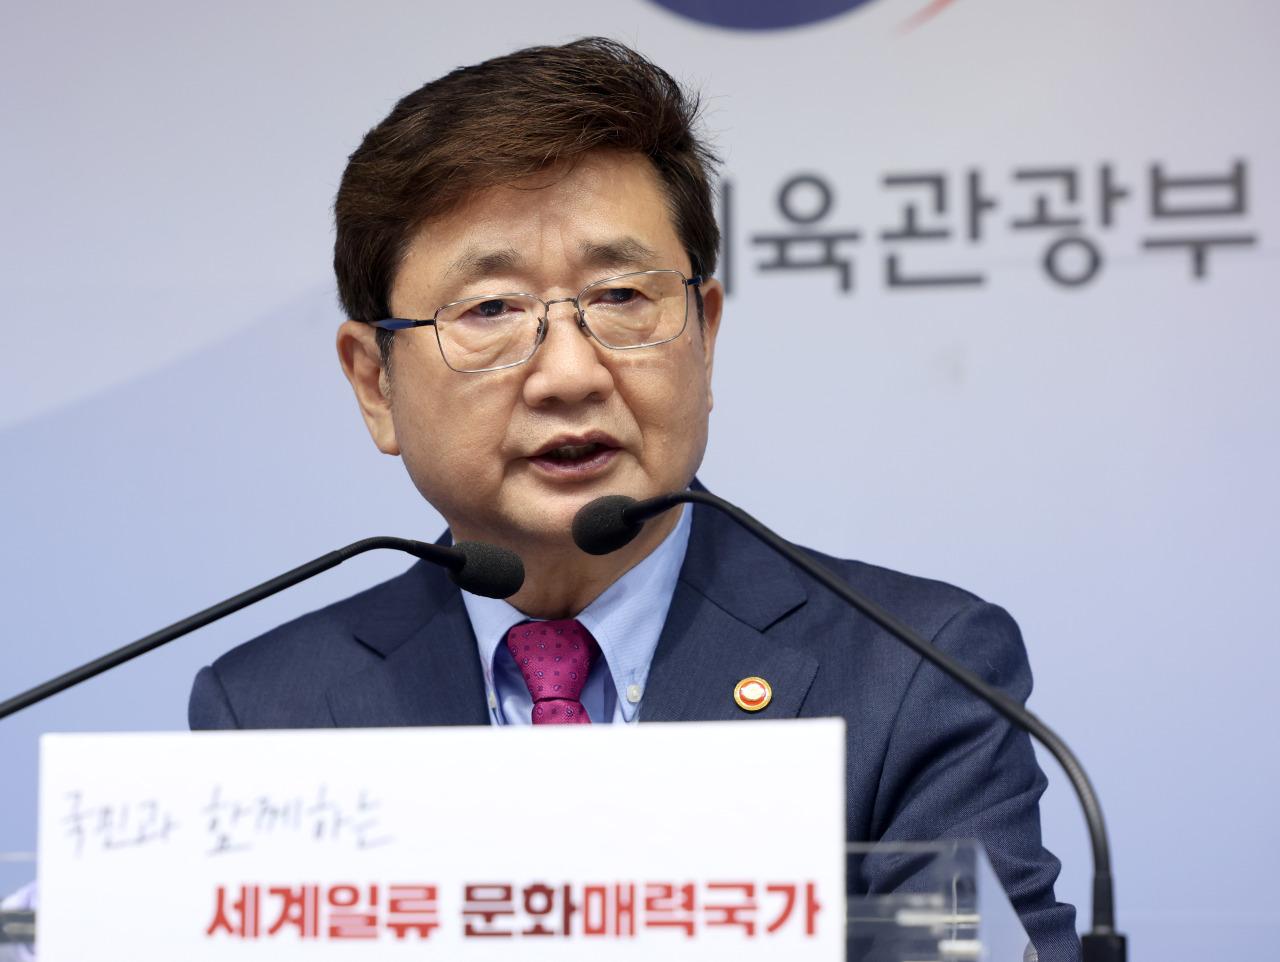 Park Bo-gyoon, the minister of culture, sports and tourism, speaks during a press conference at the government complex in Sejong City on Monday. (MCTS)